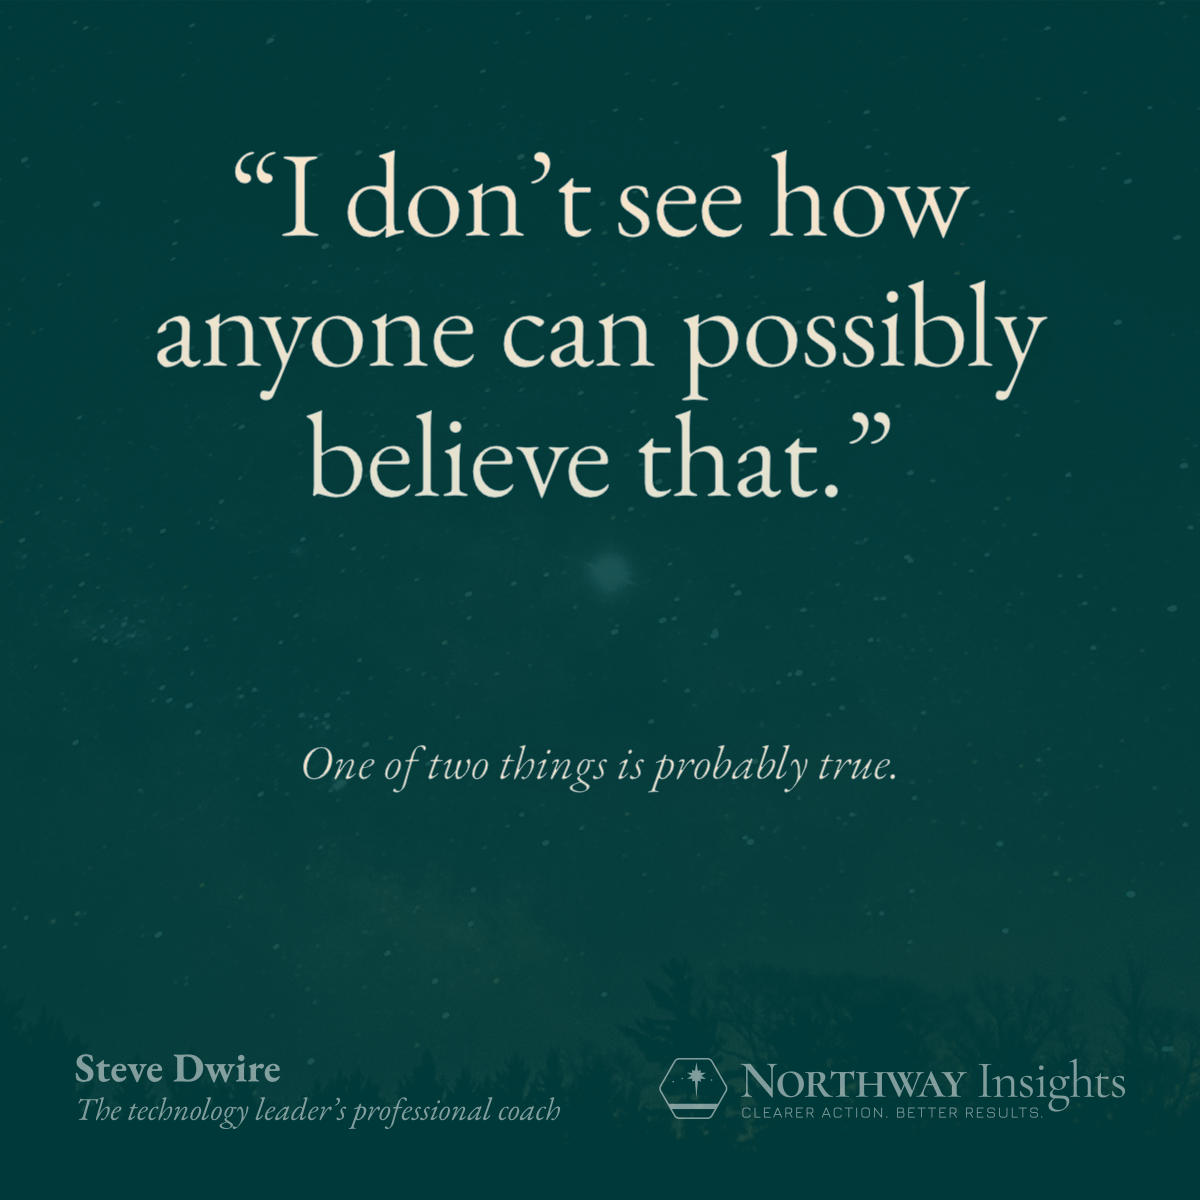 "I don't see how anyone can possibly believe that." (One of two things is probably true.)